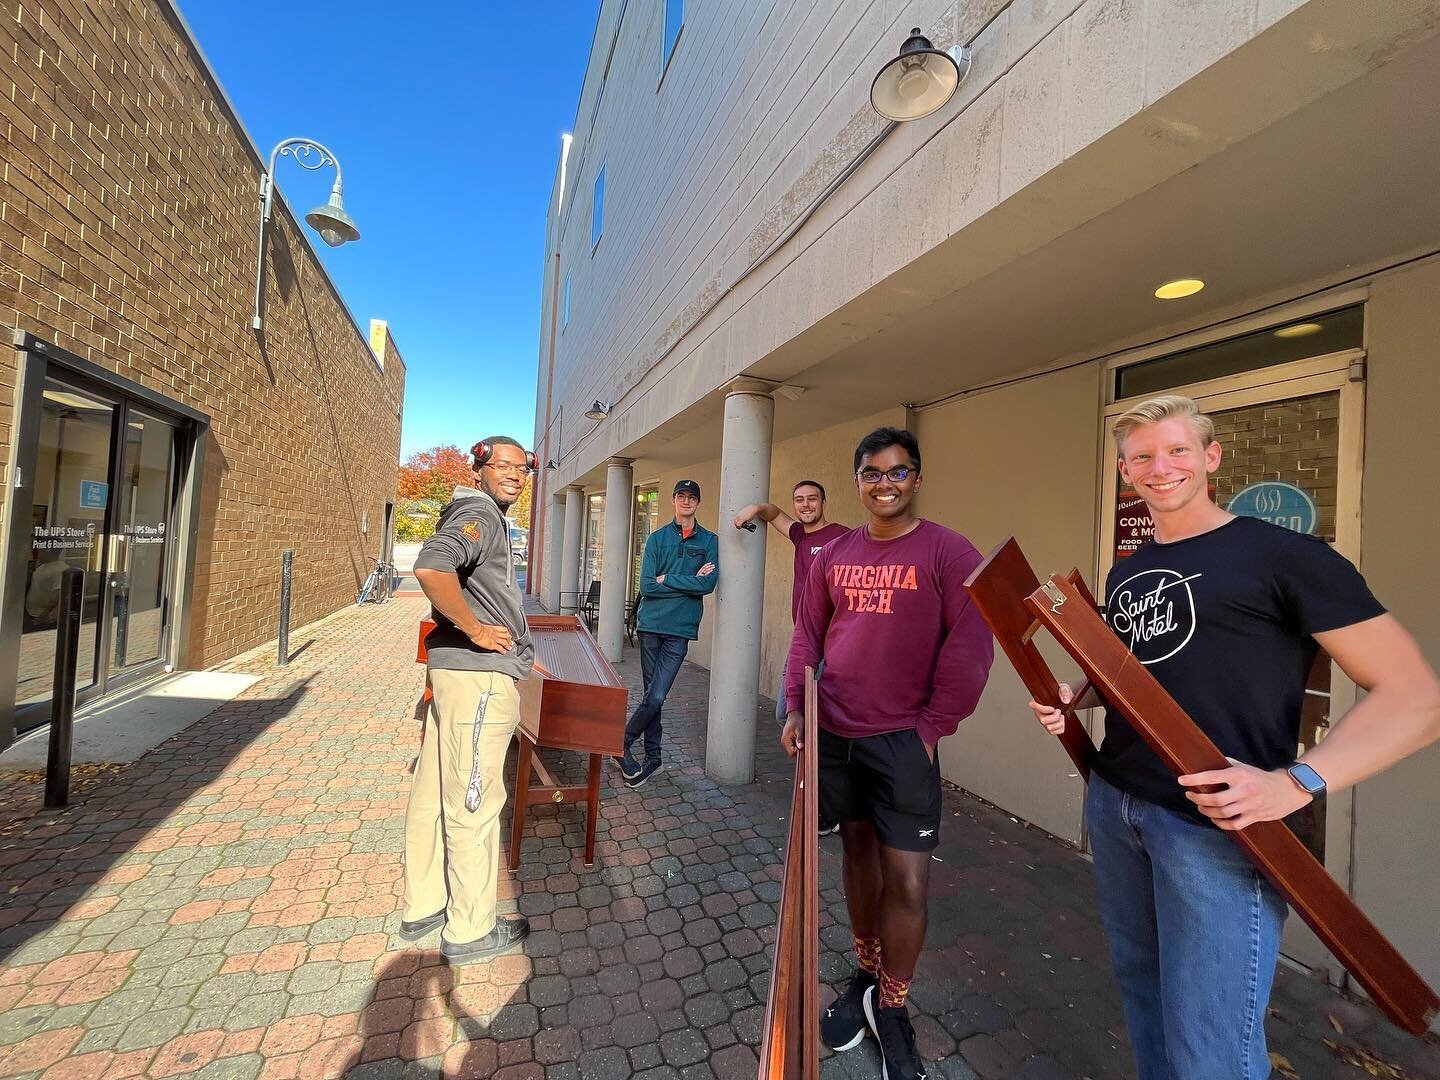 Thank you to the Brothers who helped with the Harpsichord move on October 14! #service #kkpsi